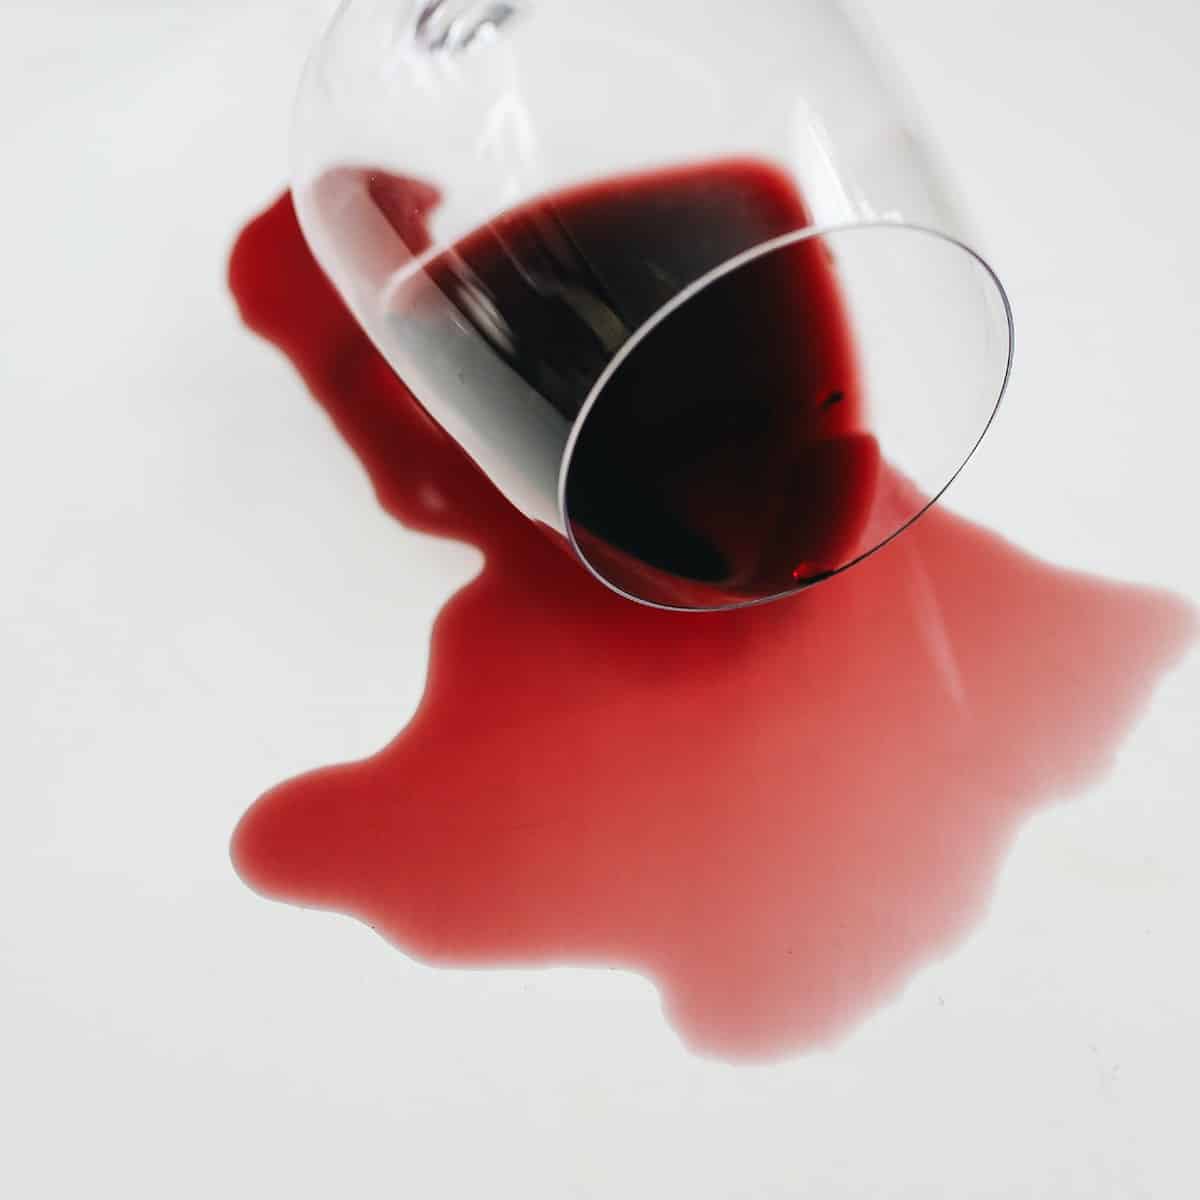 Photo of spilled red wine and a glass